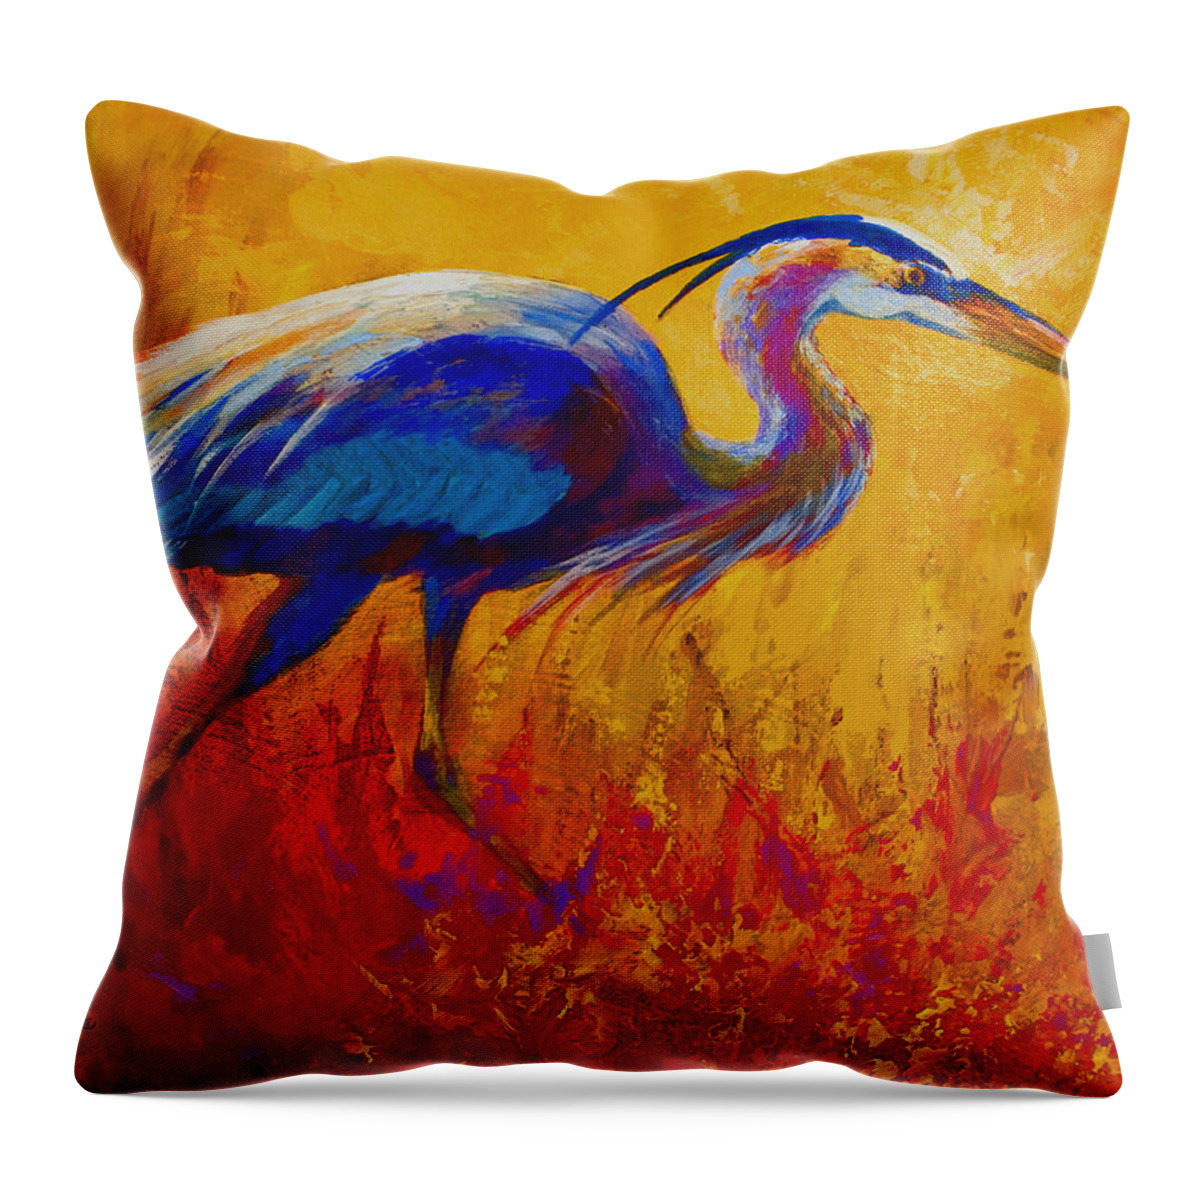 Heron Throw Pillow featuring the painting Blue Heron by Marion Rose